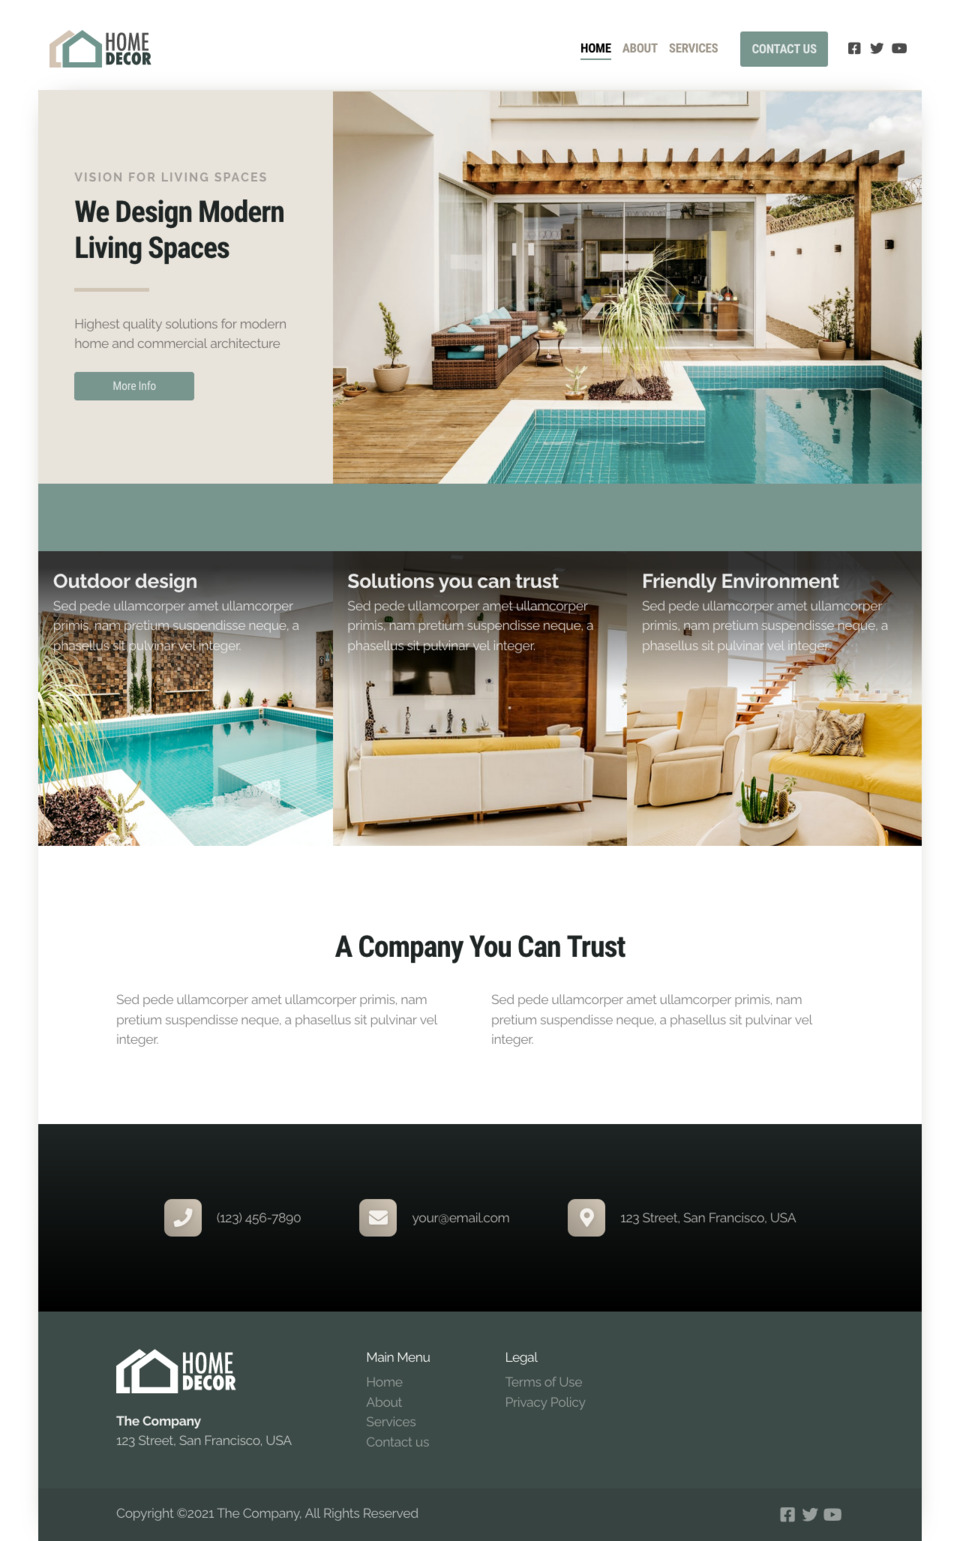 Homedecor Website Template - Ideal for small businesses in interior design, home decoration, or house industries